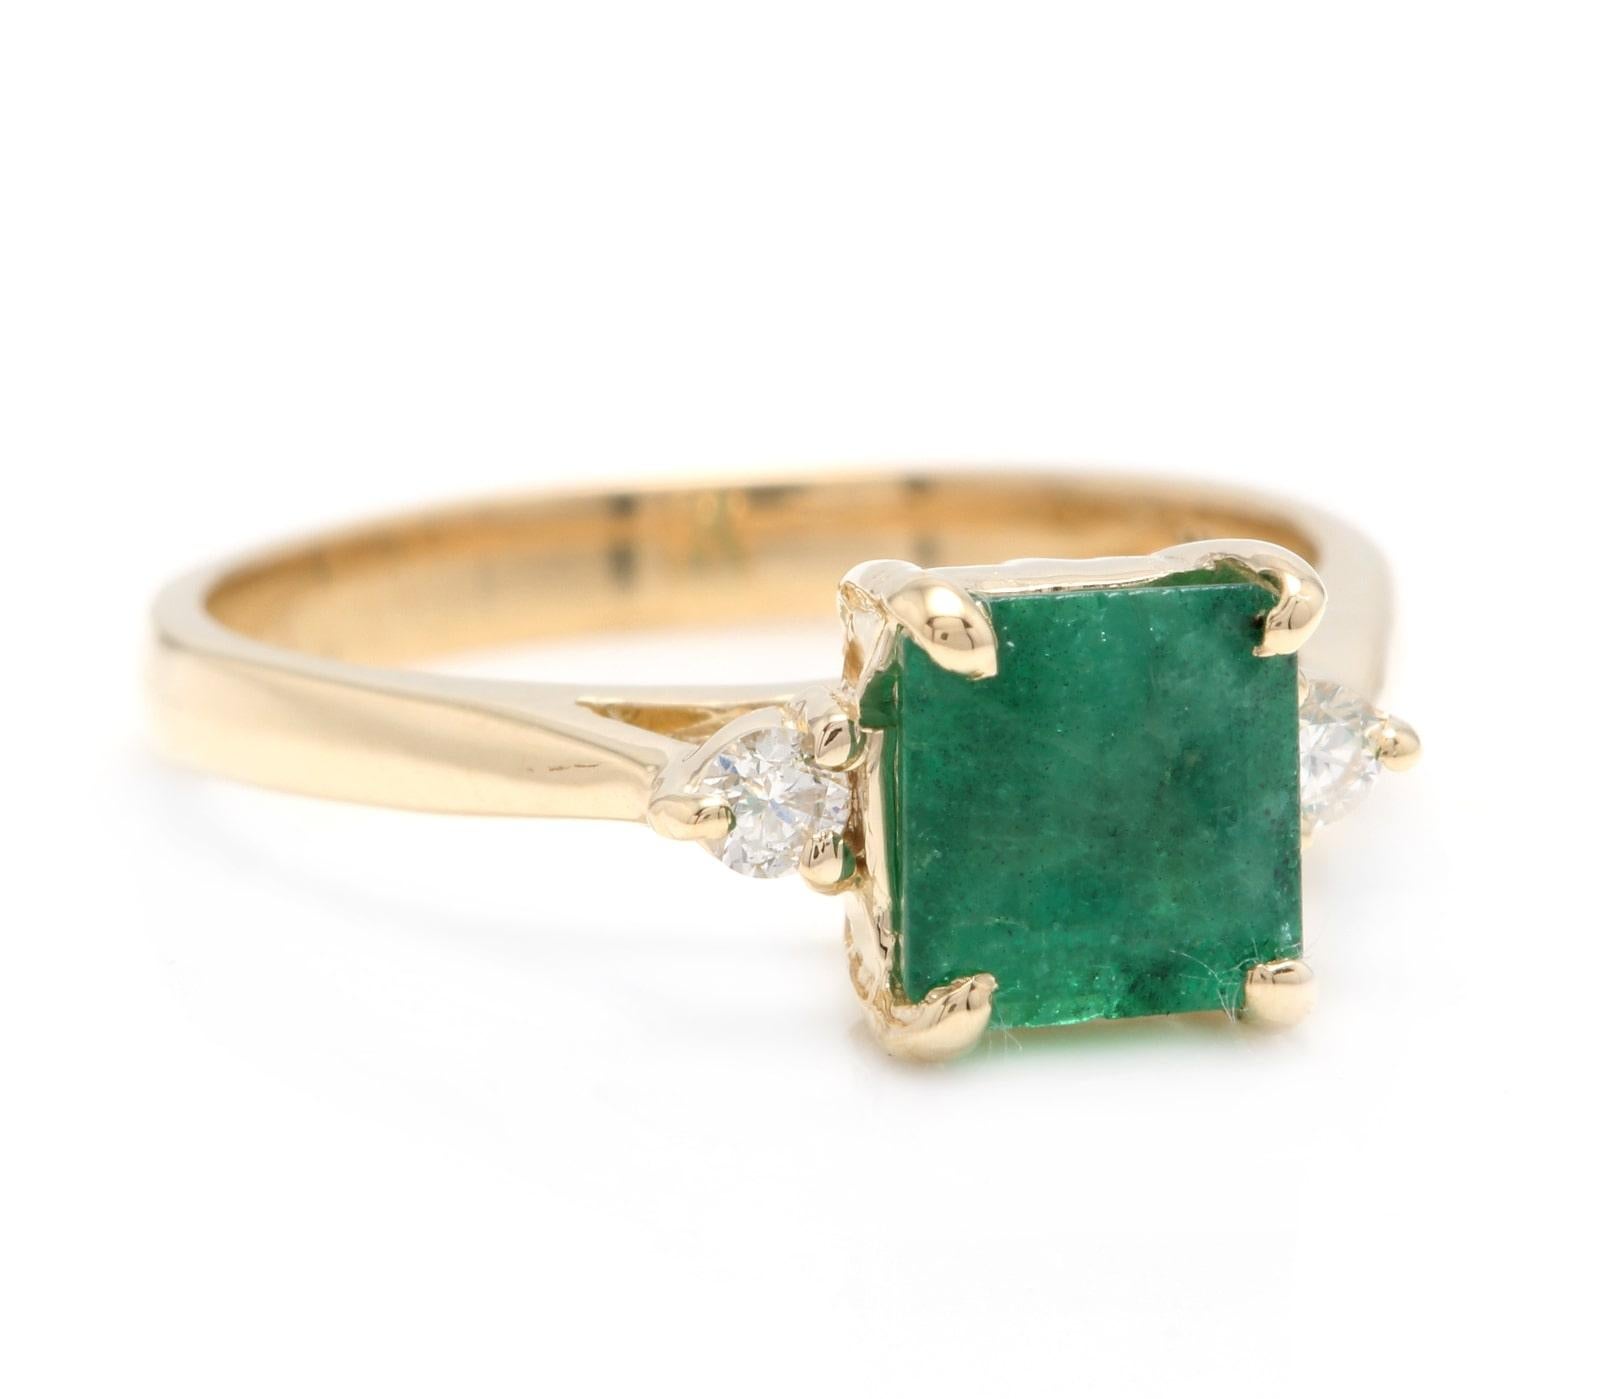 1.28 Carats Natural Emerald and Diamond 14K Solid Yellow Gold Ring

Total Natural Green Emerald Weight is: Approx. 1.20 Carats

Emerald Measures: 6.30 x 5.80mm

Natural Round Diamonds Weight: 0.08 Carats (color G-H / Clarity SI1-SI2)

Ring total